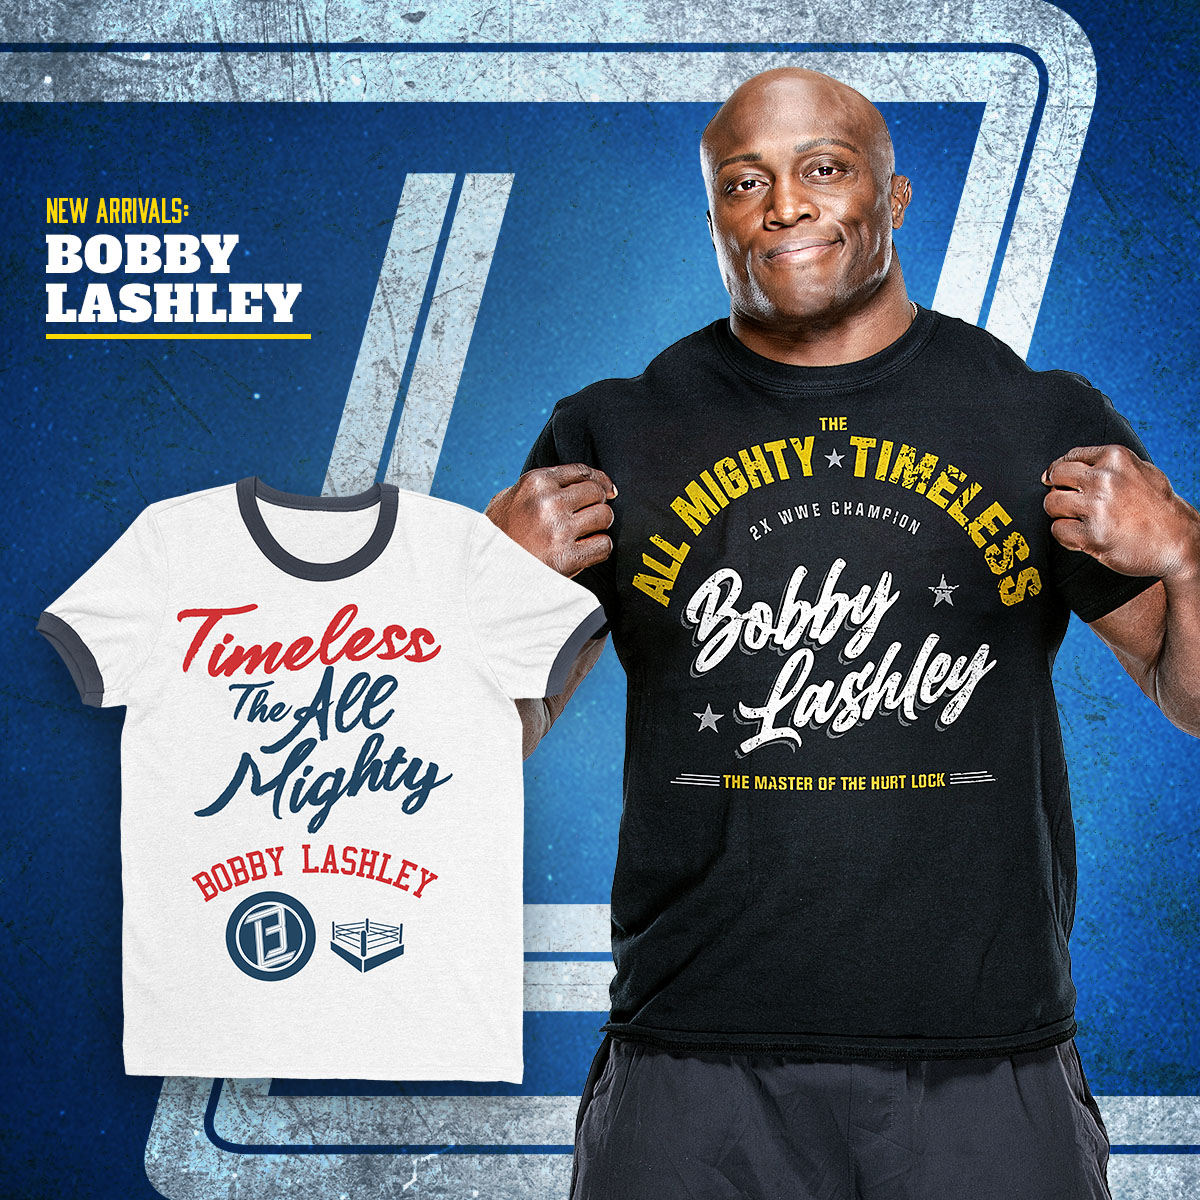 “The All Mighty” @fightbobby is Timeless! Become a Master of the Hurt Lock with these NEW T-Shirts! 🛒: bit.ly/3RfOnme | #WWE